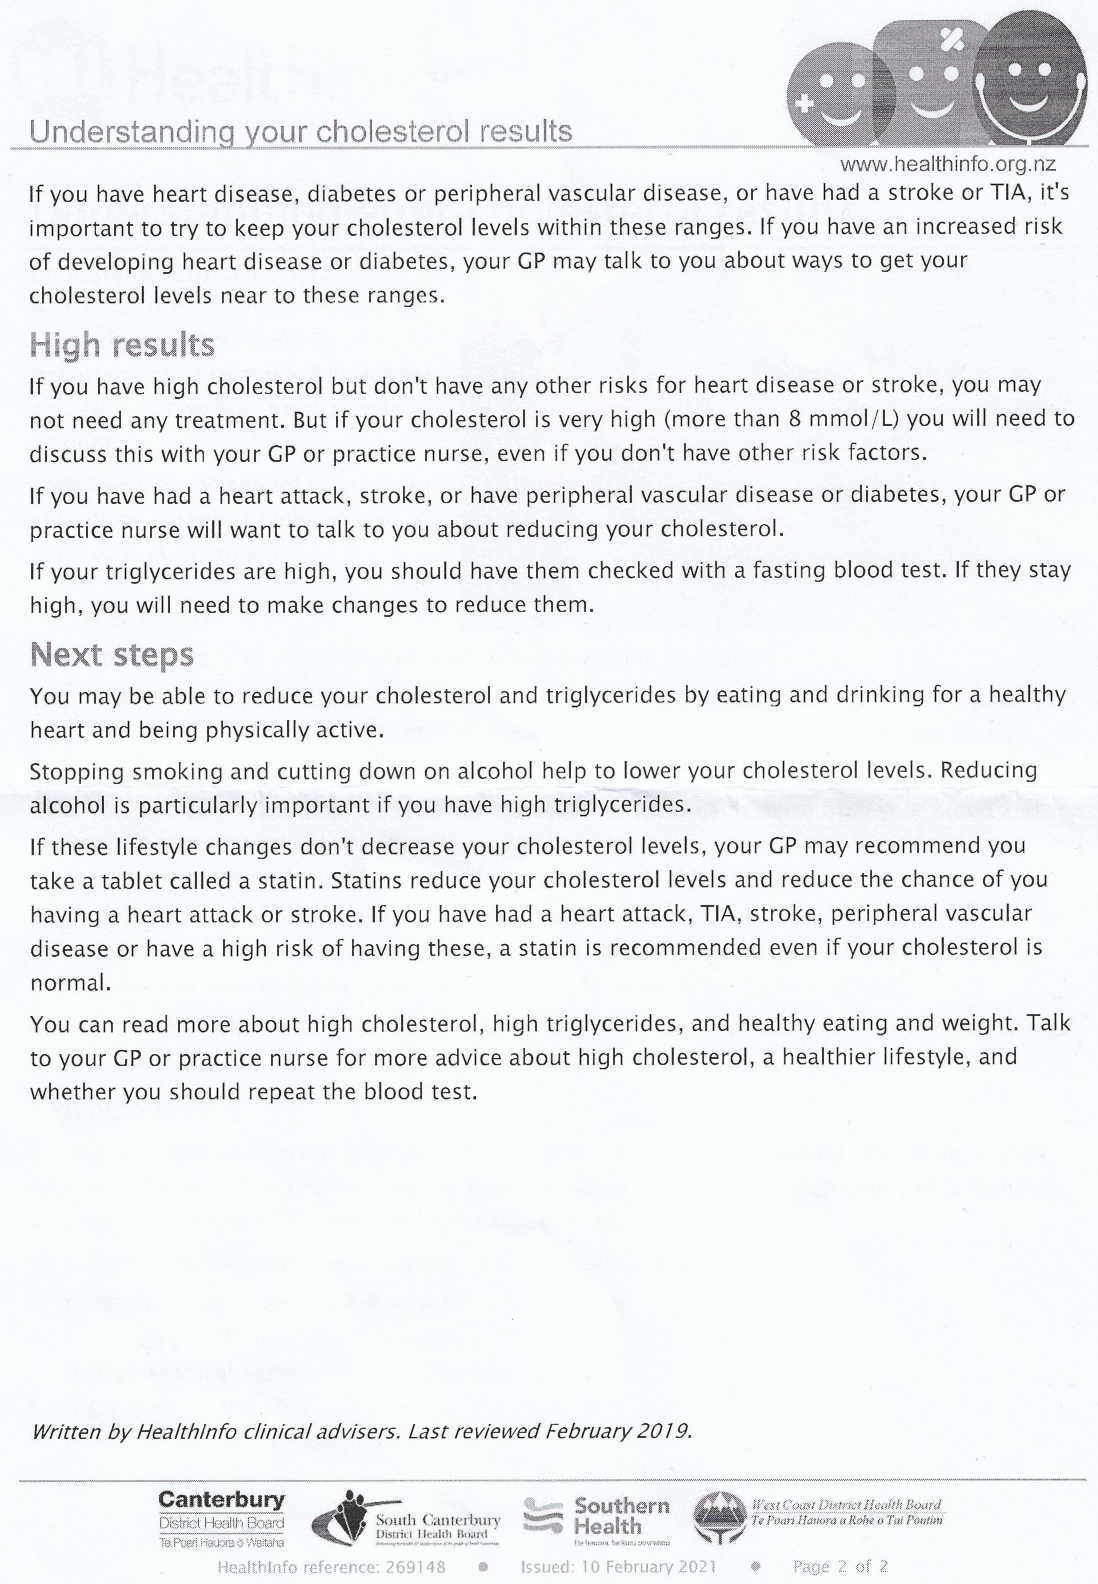 Dietician advice page 2